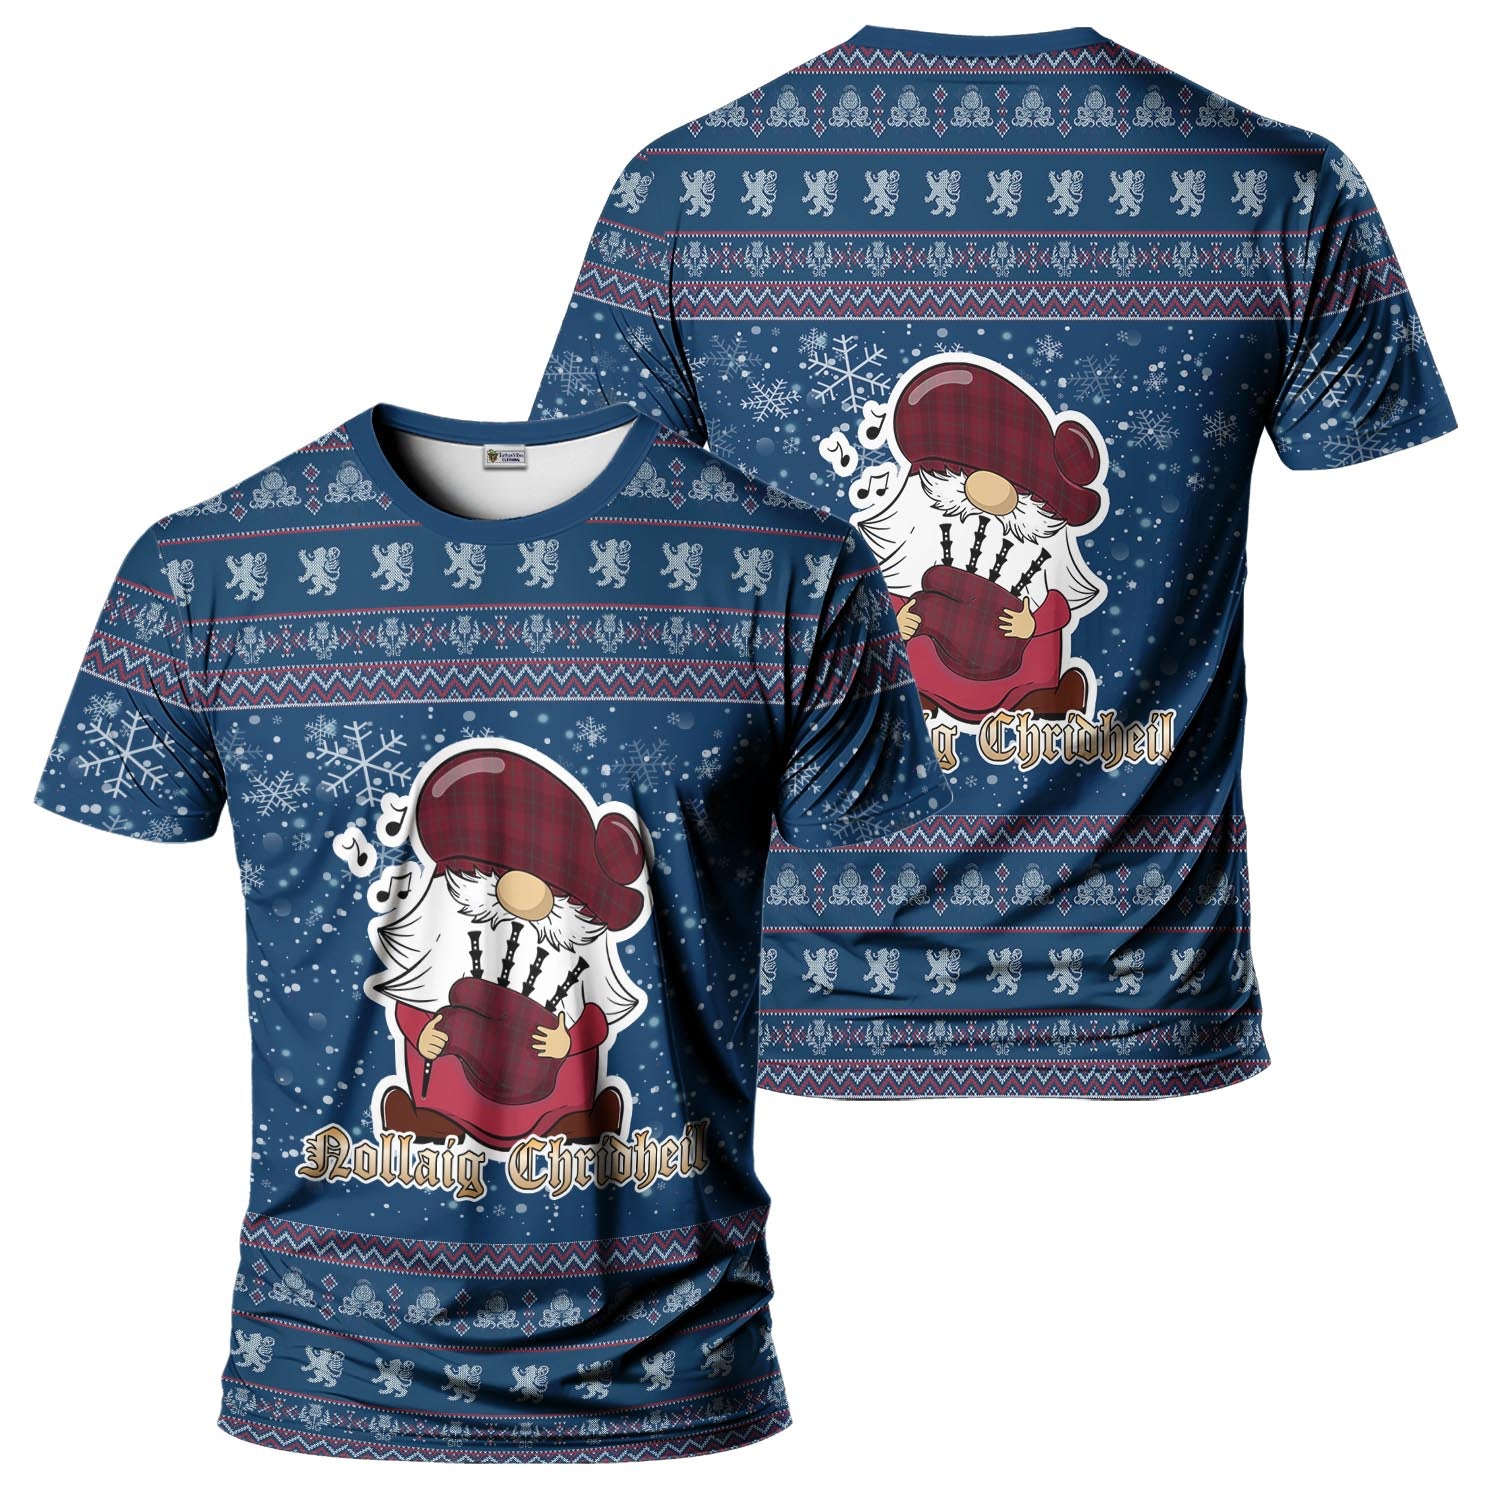 Stirling of Keir Clan Christmas Family T-Shirt with Funny Gnome Playing Bagpipes Kid's Shirt Blue - Tartanvibesclothing